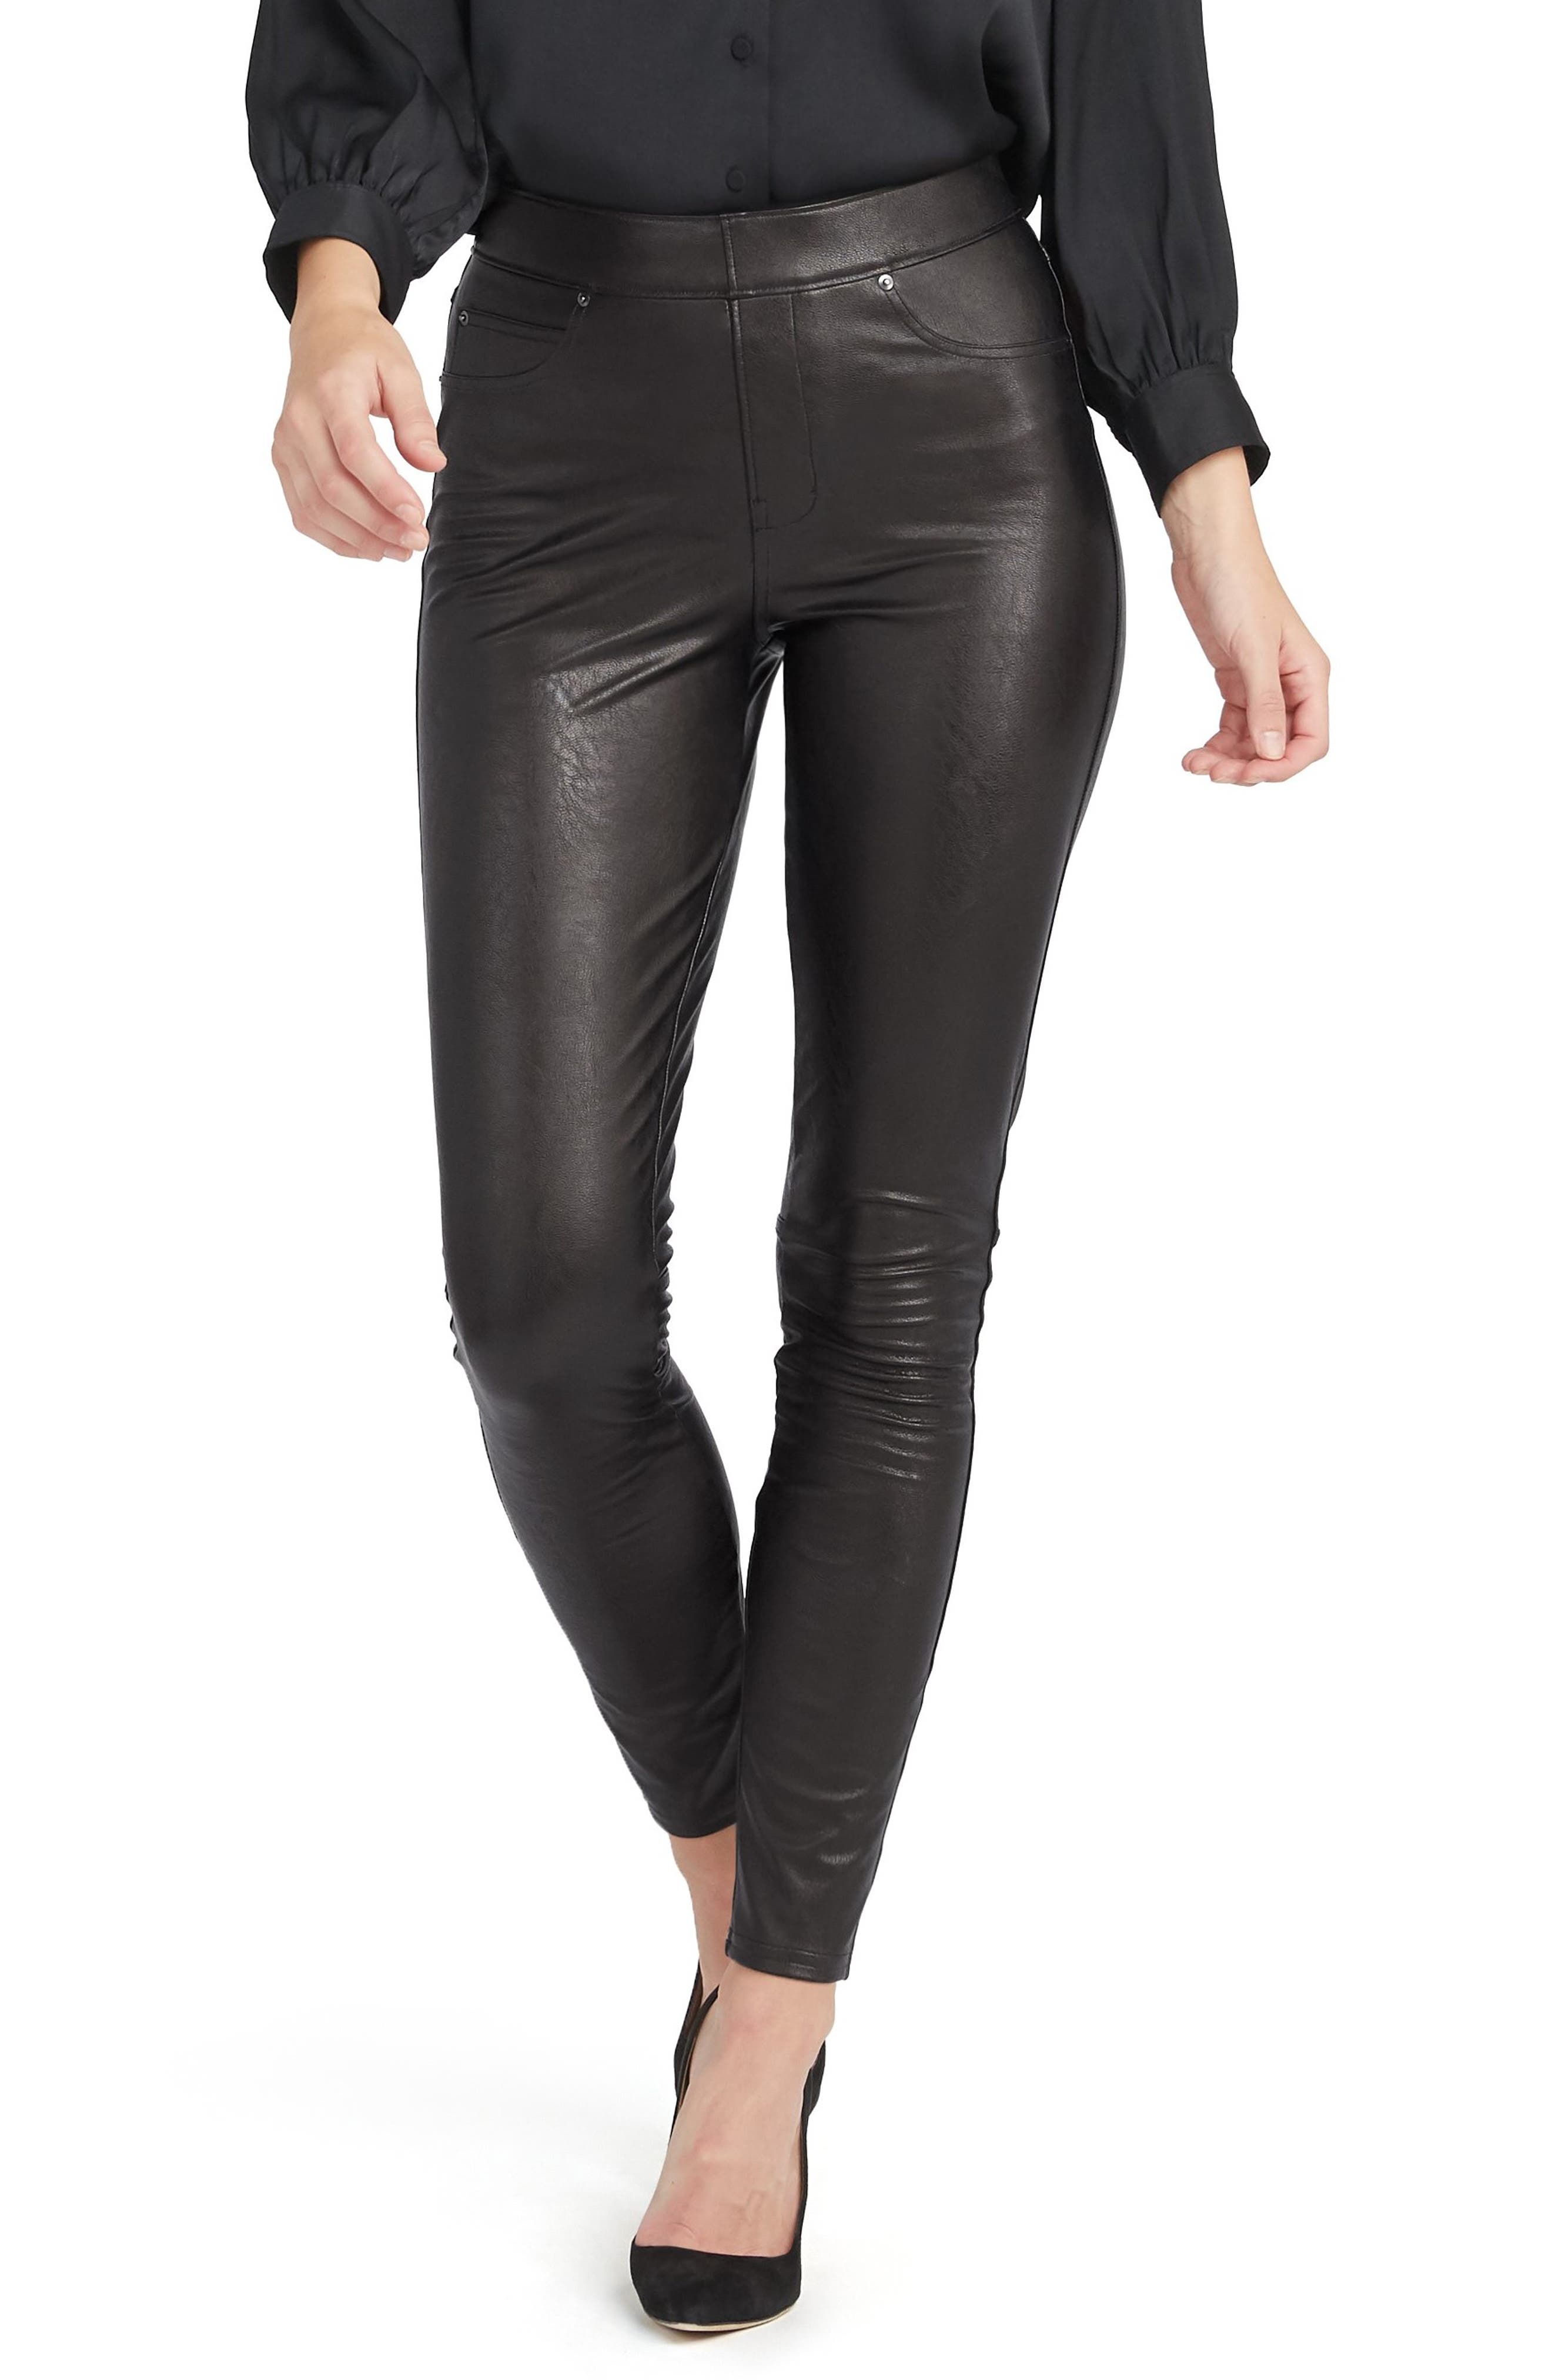 LEATHER LOOK LEGGINGS TROUSERS H AND M STRETCH PANTS NEW WOMENS BLACK SKINNY PU 